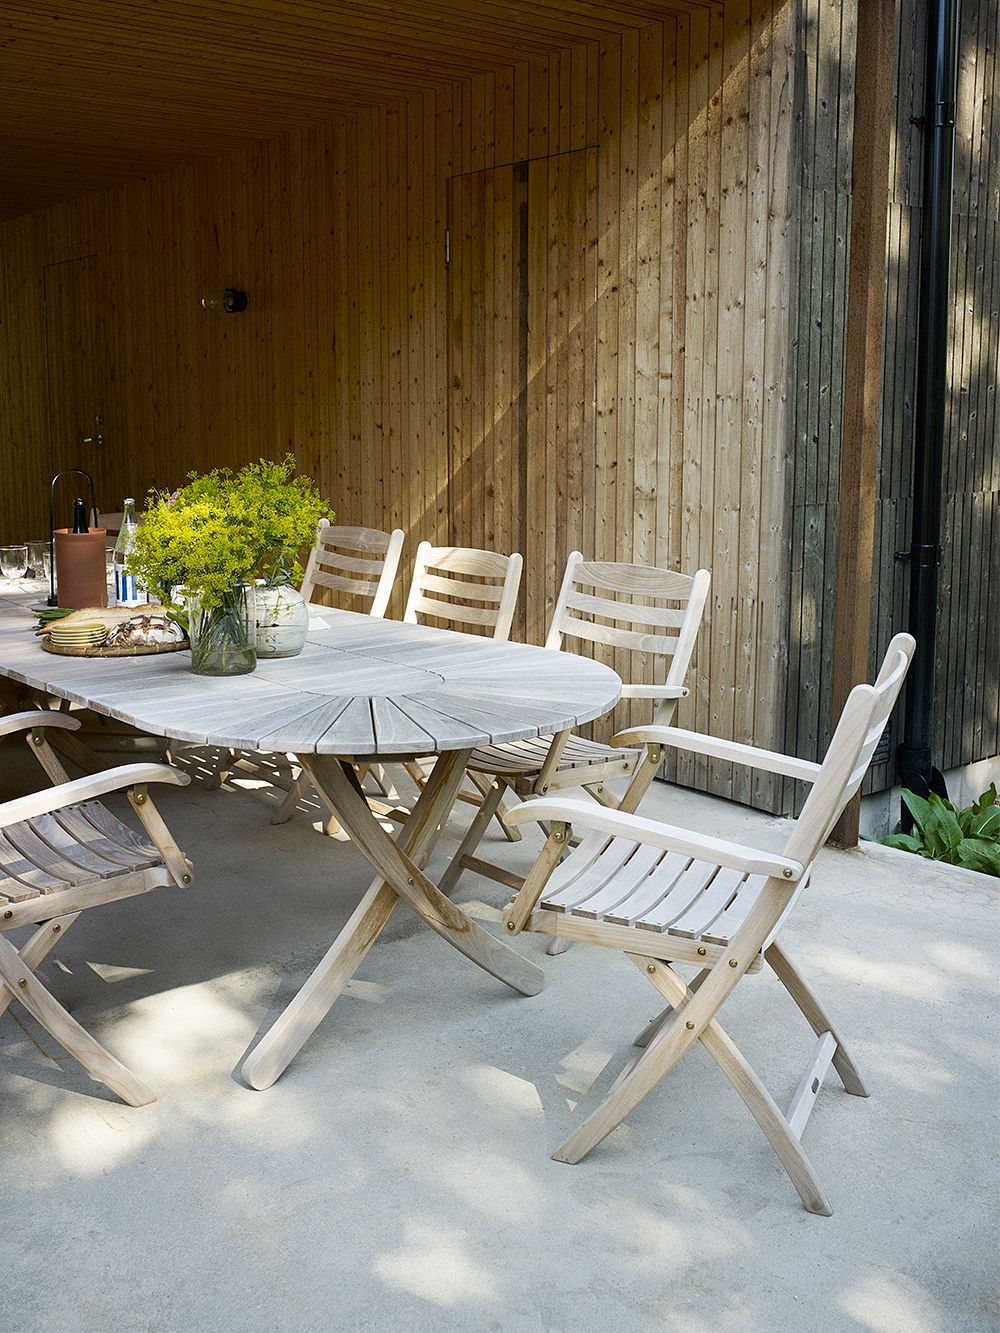 An image of Skagerak's Selandia table and chairs by a summer house, as part of the summer cottage decor.